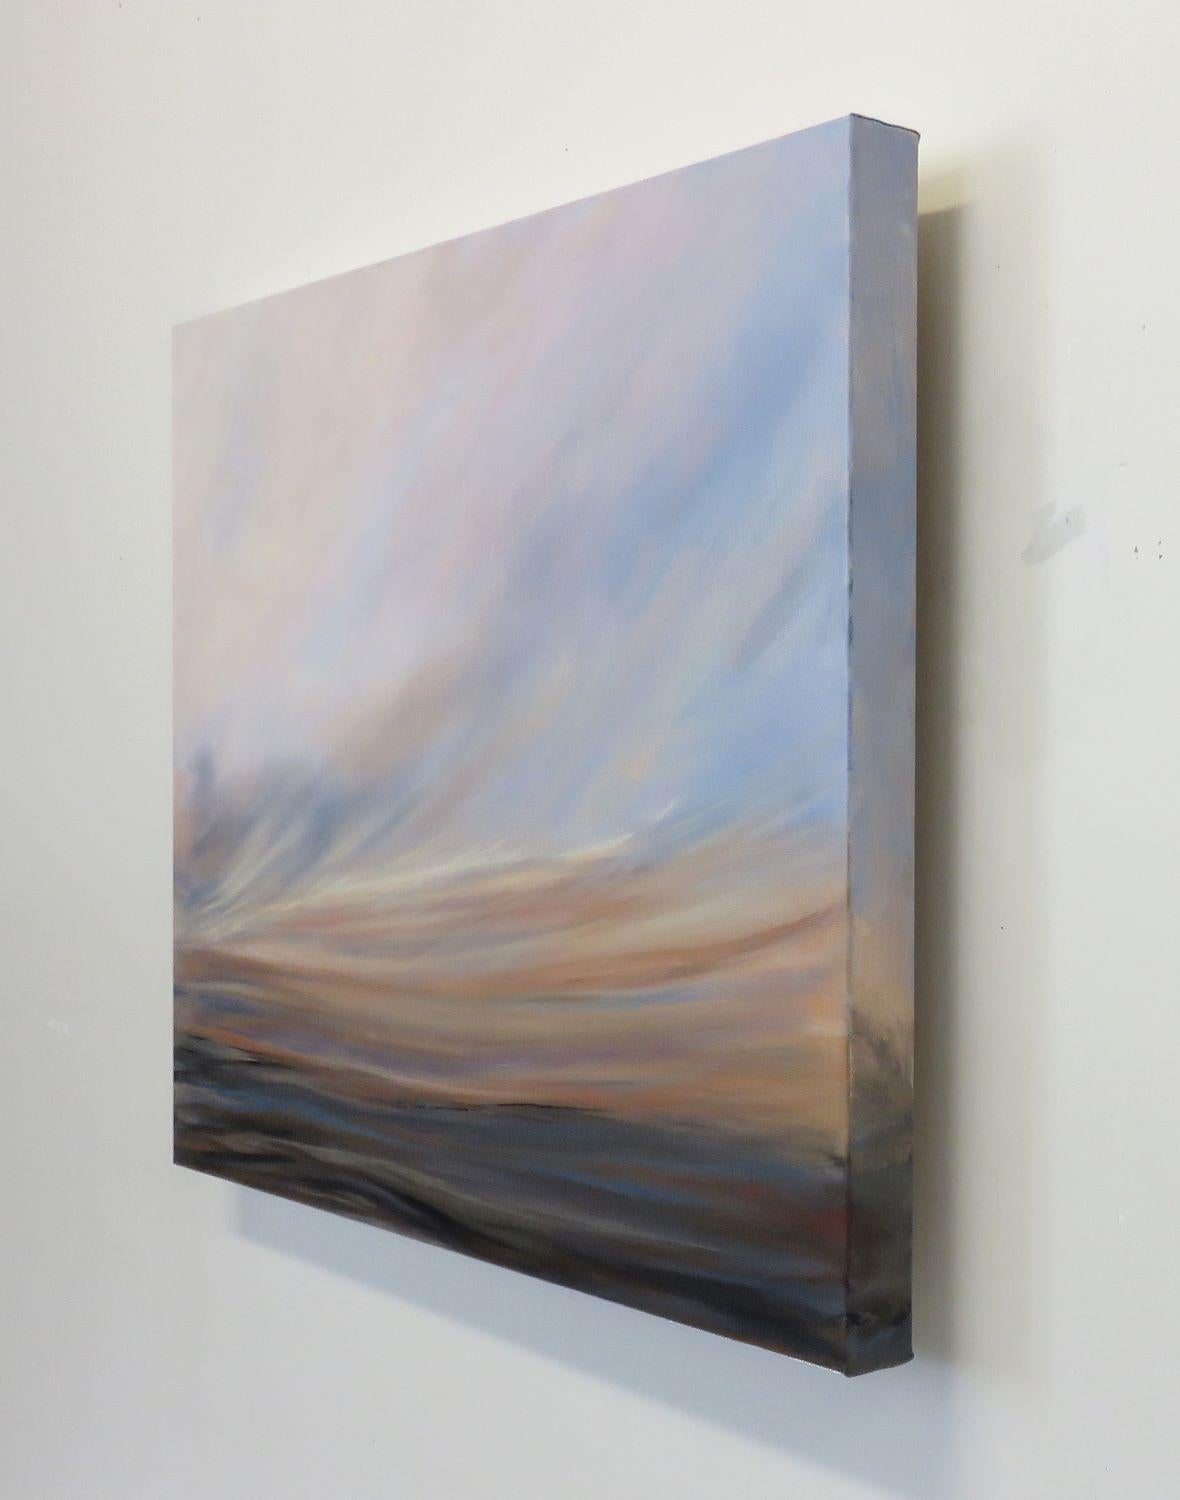 <p>Artist Comments<br>Sunsets wield a powerful influence over artist Jenn Williamson, igniting abundant creative inspiration. Her artwork originates from her imaginative mind, portraying the essence of multiple sunsets she's witnessed, evoking a